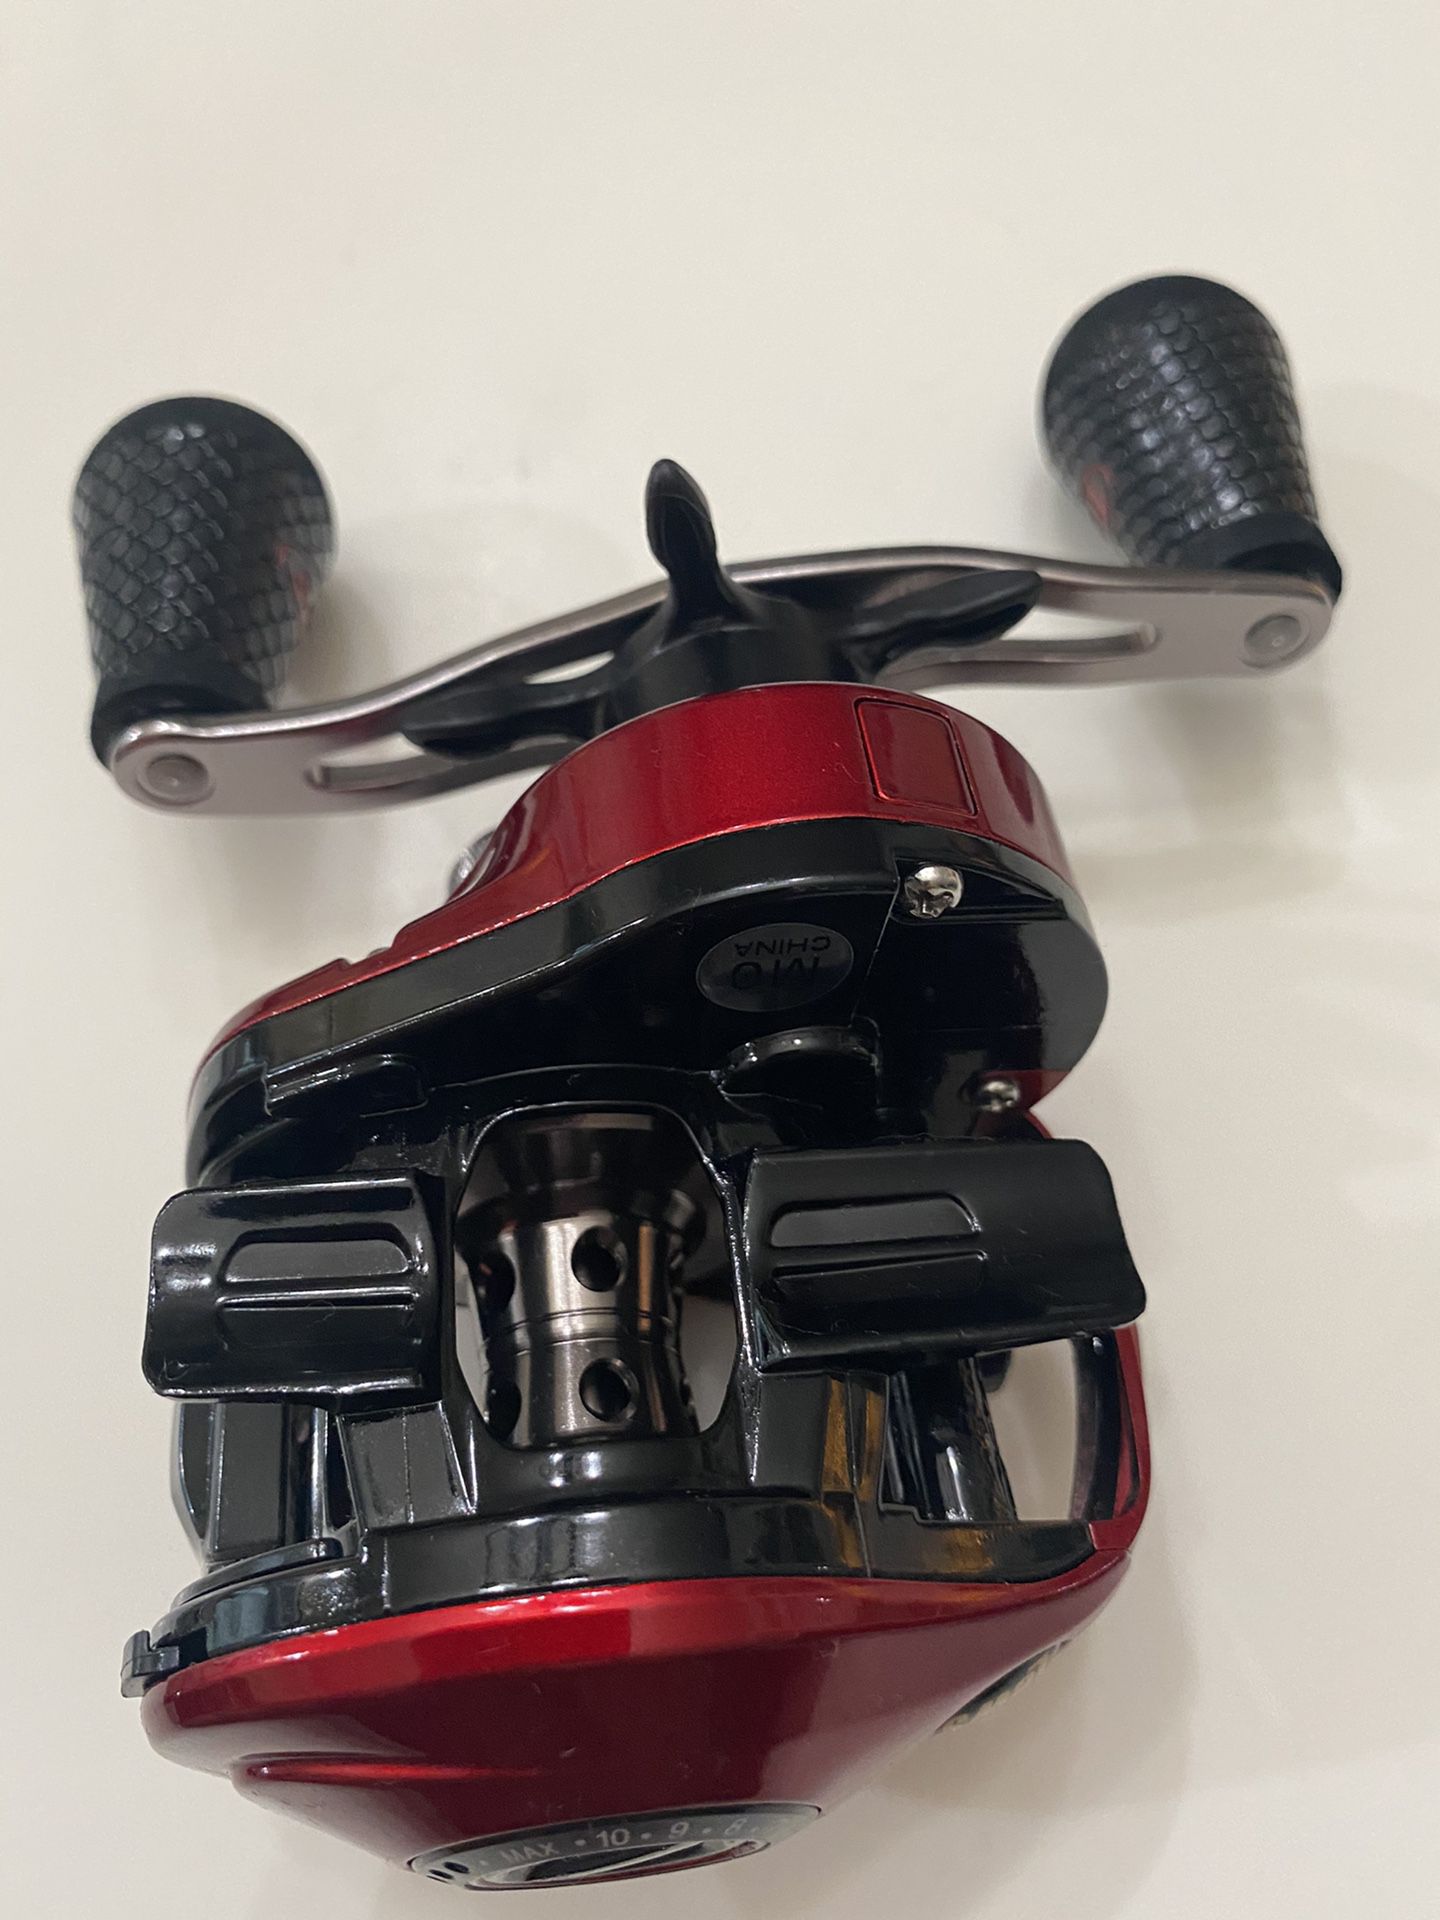 2 Lew's Hack Attack Baitcasting Fishing Reels Brand New for Sale